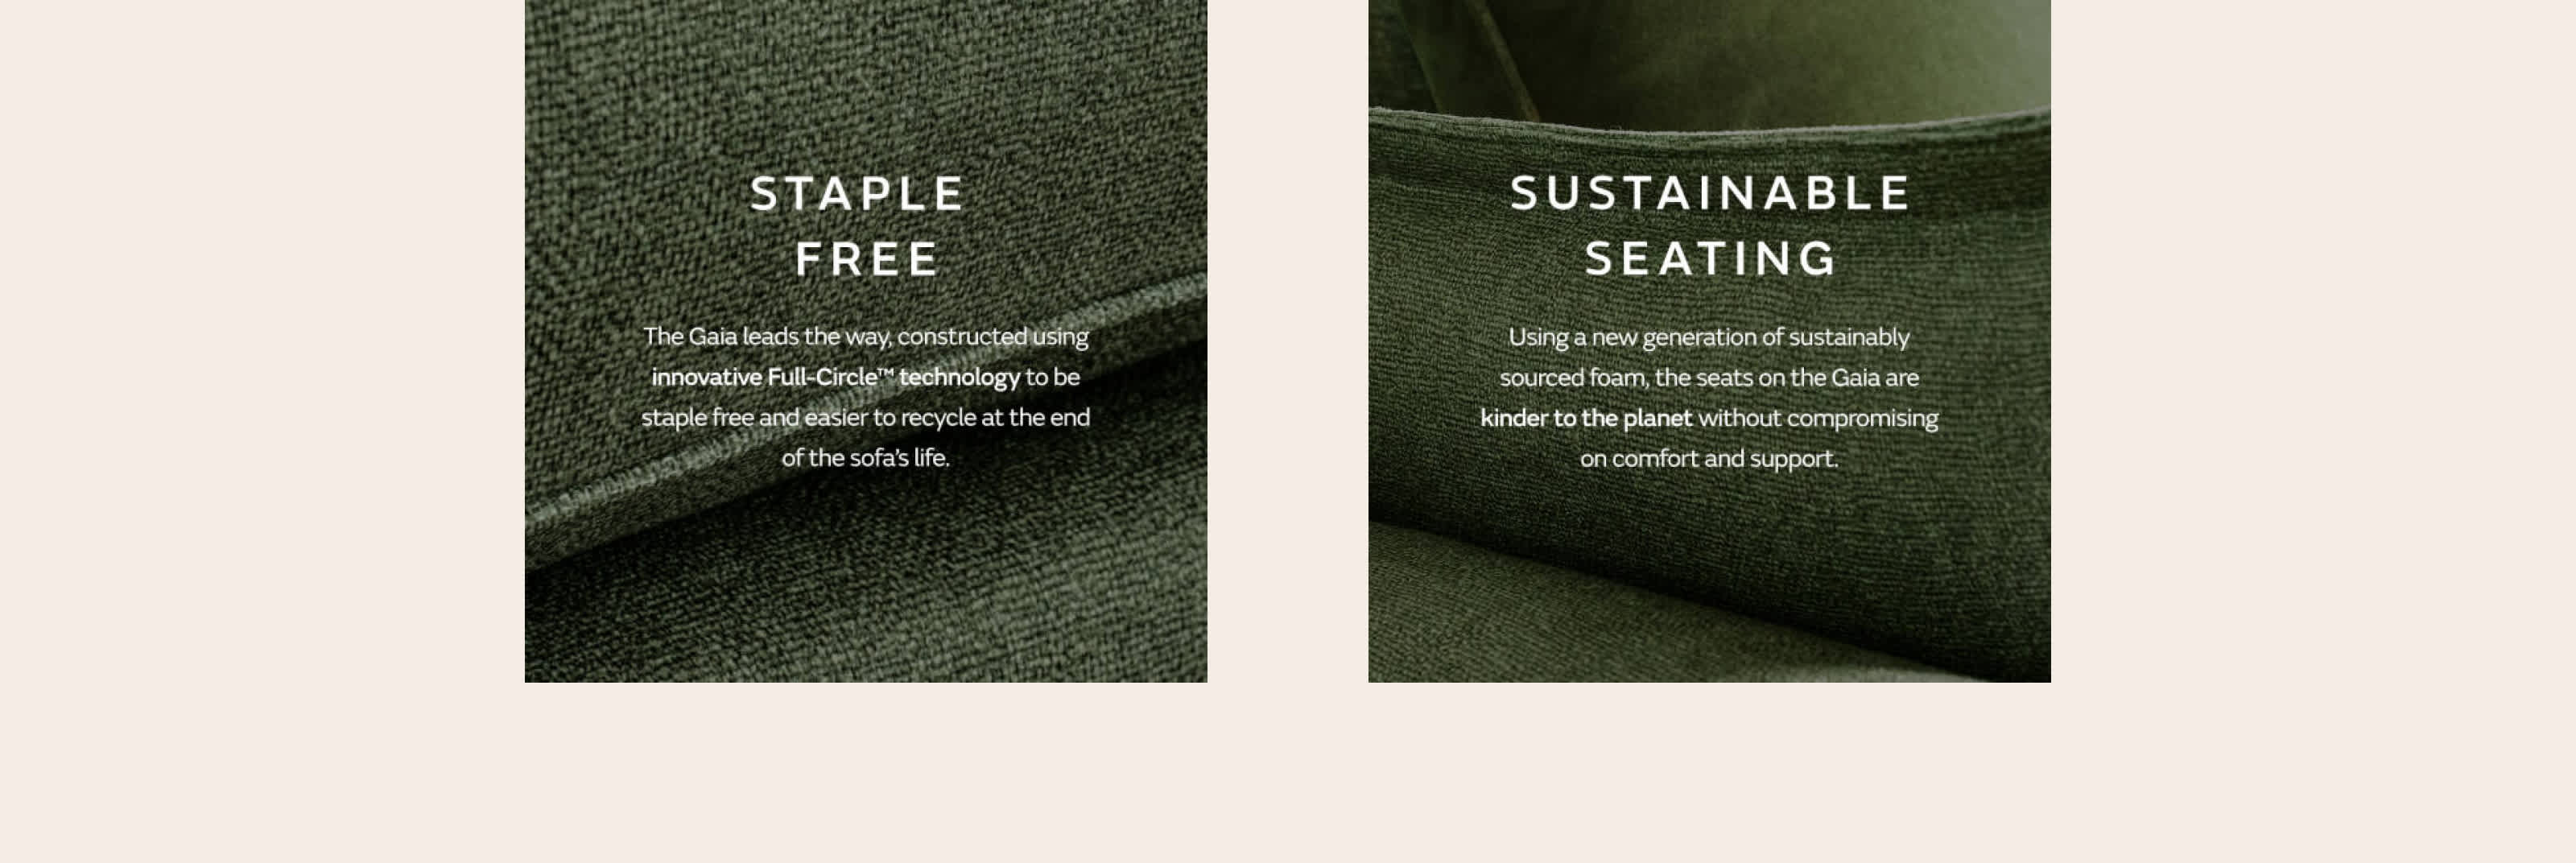 Staple free and sustainable seating